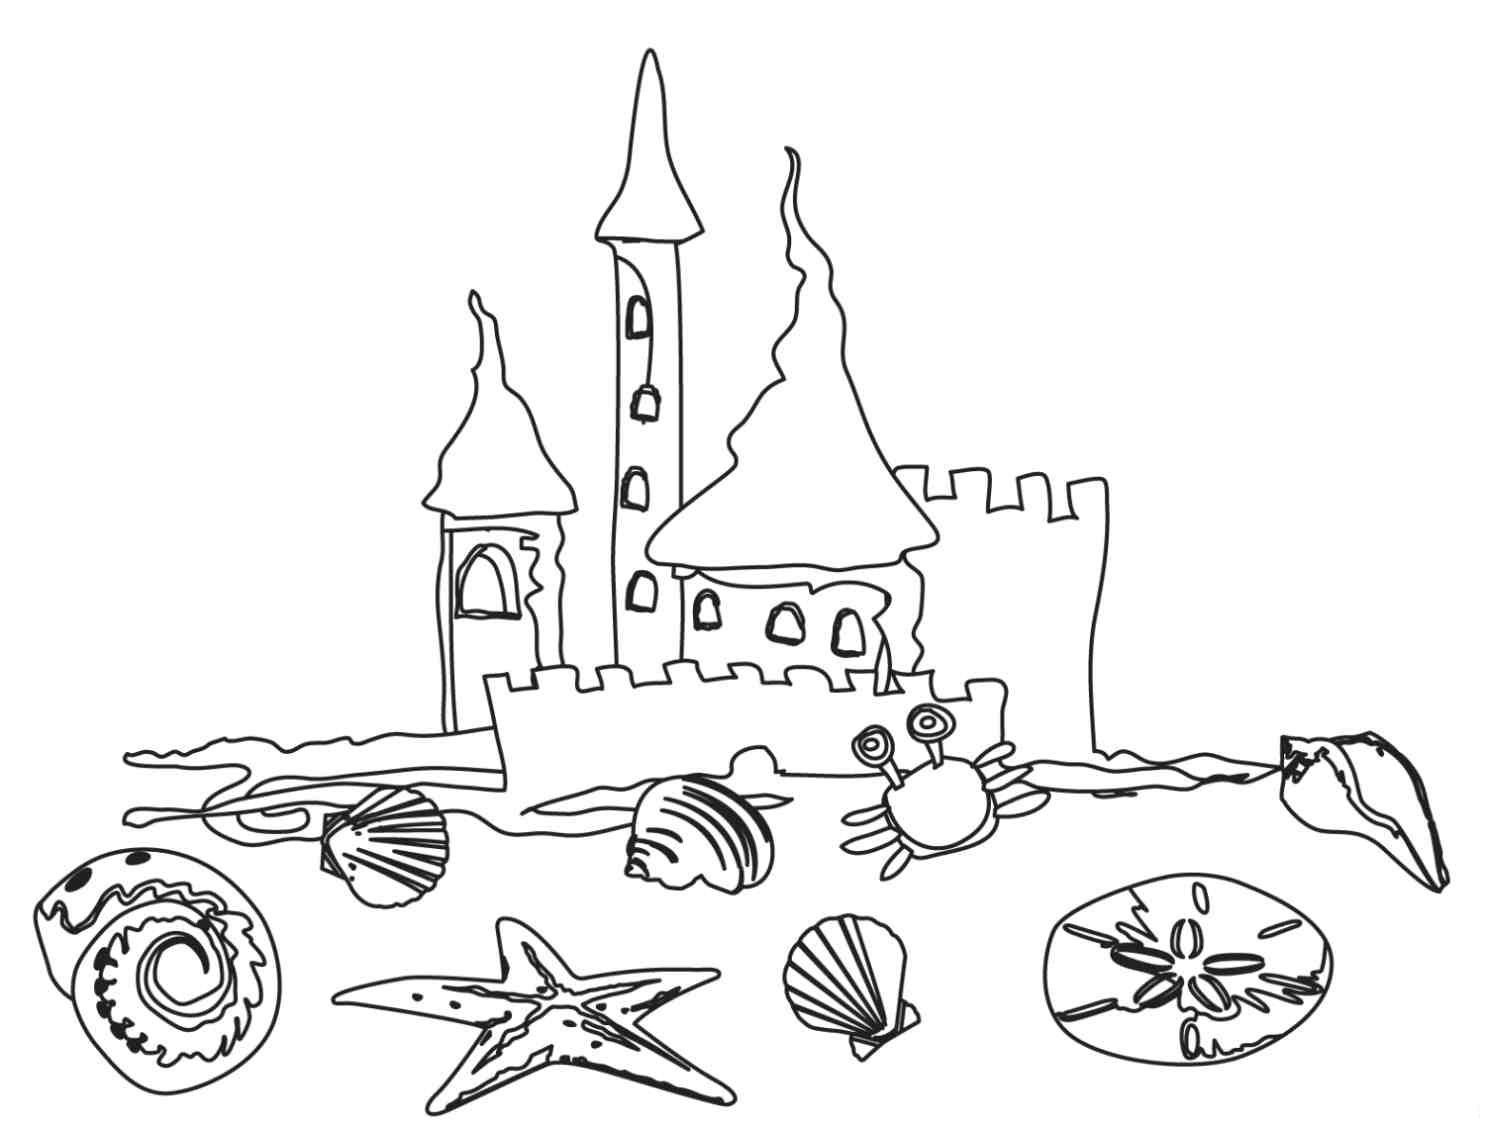 Preschool Coloring Pages (6) - Coloring Kids